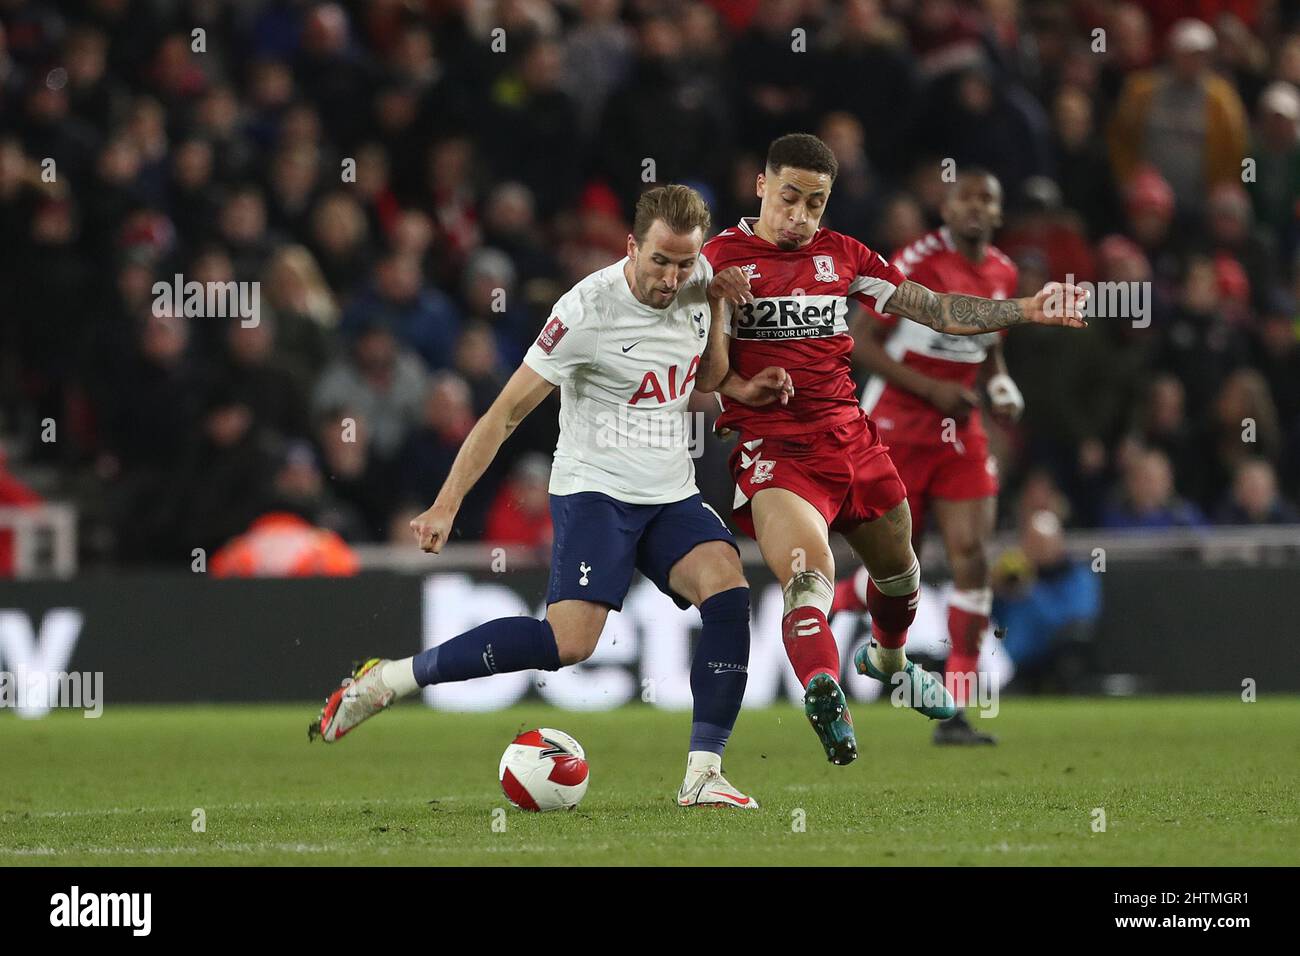 MIDDLESBROUGH, UK. MAR 1ST Middlesbrough's Marcus Tavernier battles with Tottenham Hotspur's Harry Kane during the FA Cup Fifth Round match between Middlesbrough and Tottenham Hotspur at the Riverside Stadium, Middlesbrough on Tuesday 1st March 2022. (Credit: Mark Fletcher | MI News) Credit: MI News & Sport /Alamy Live News Stock Photo